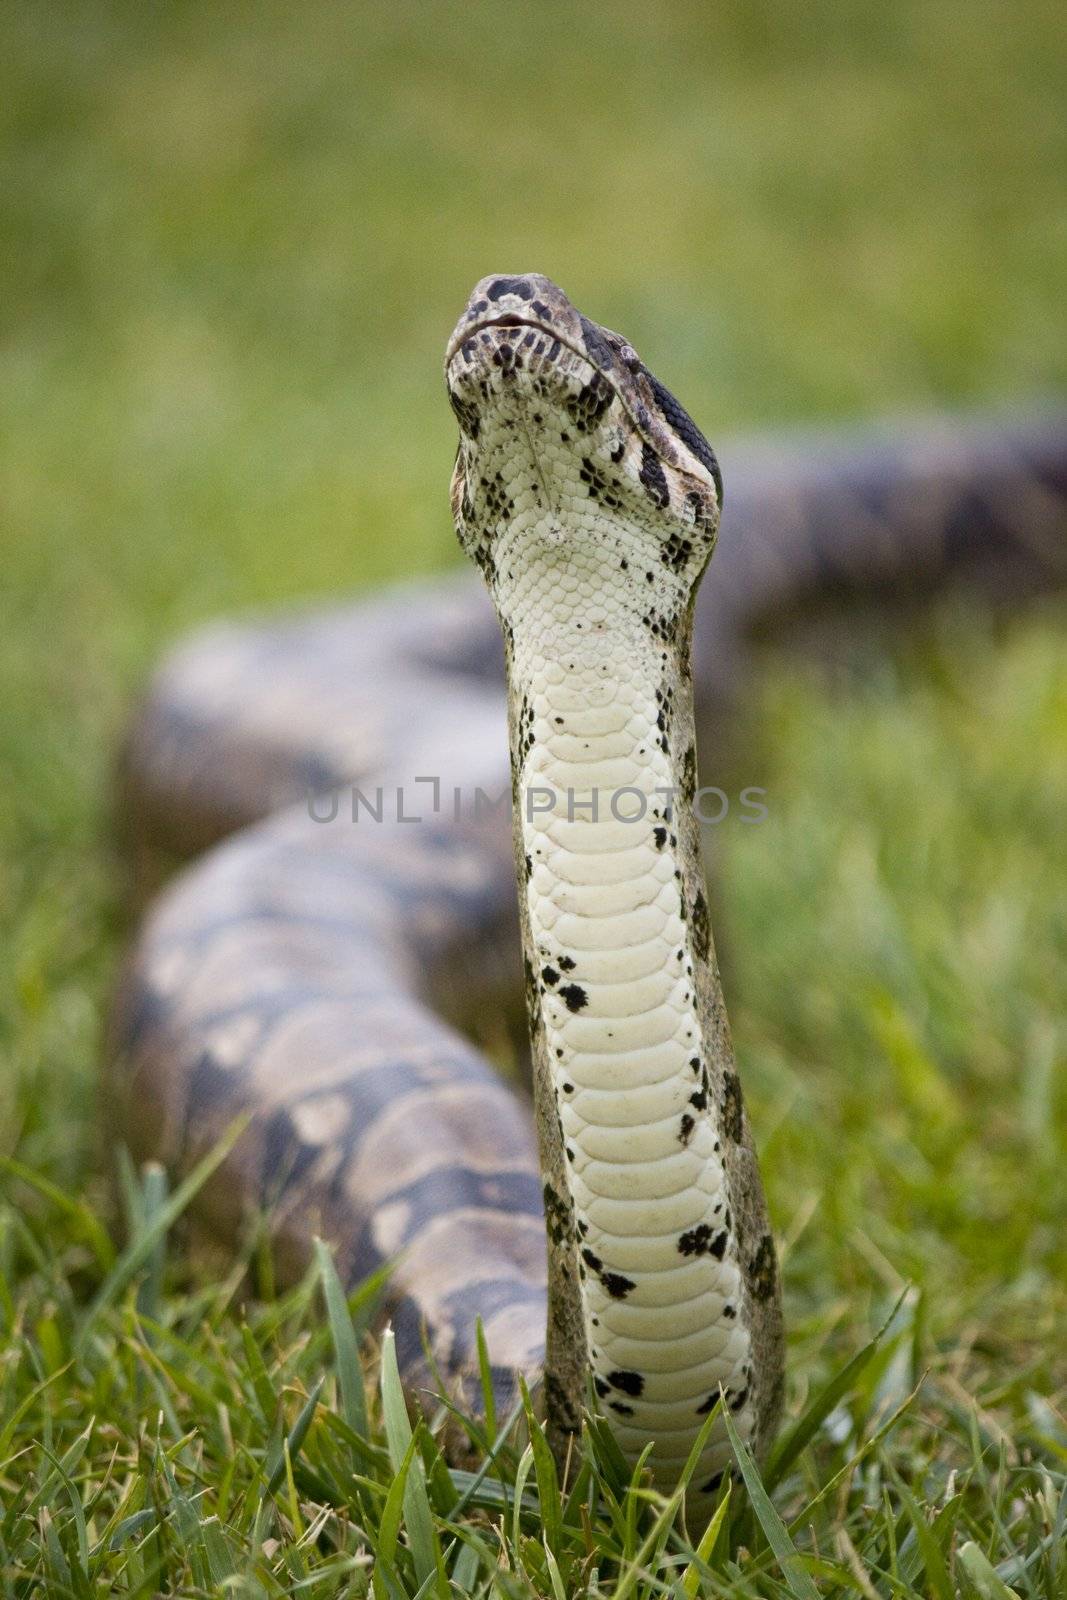 View of the head of a boa constrictor snake trying to sniff on the air.